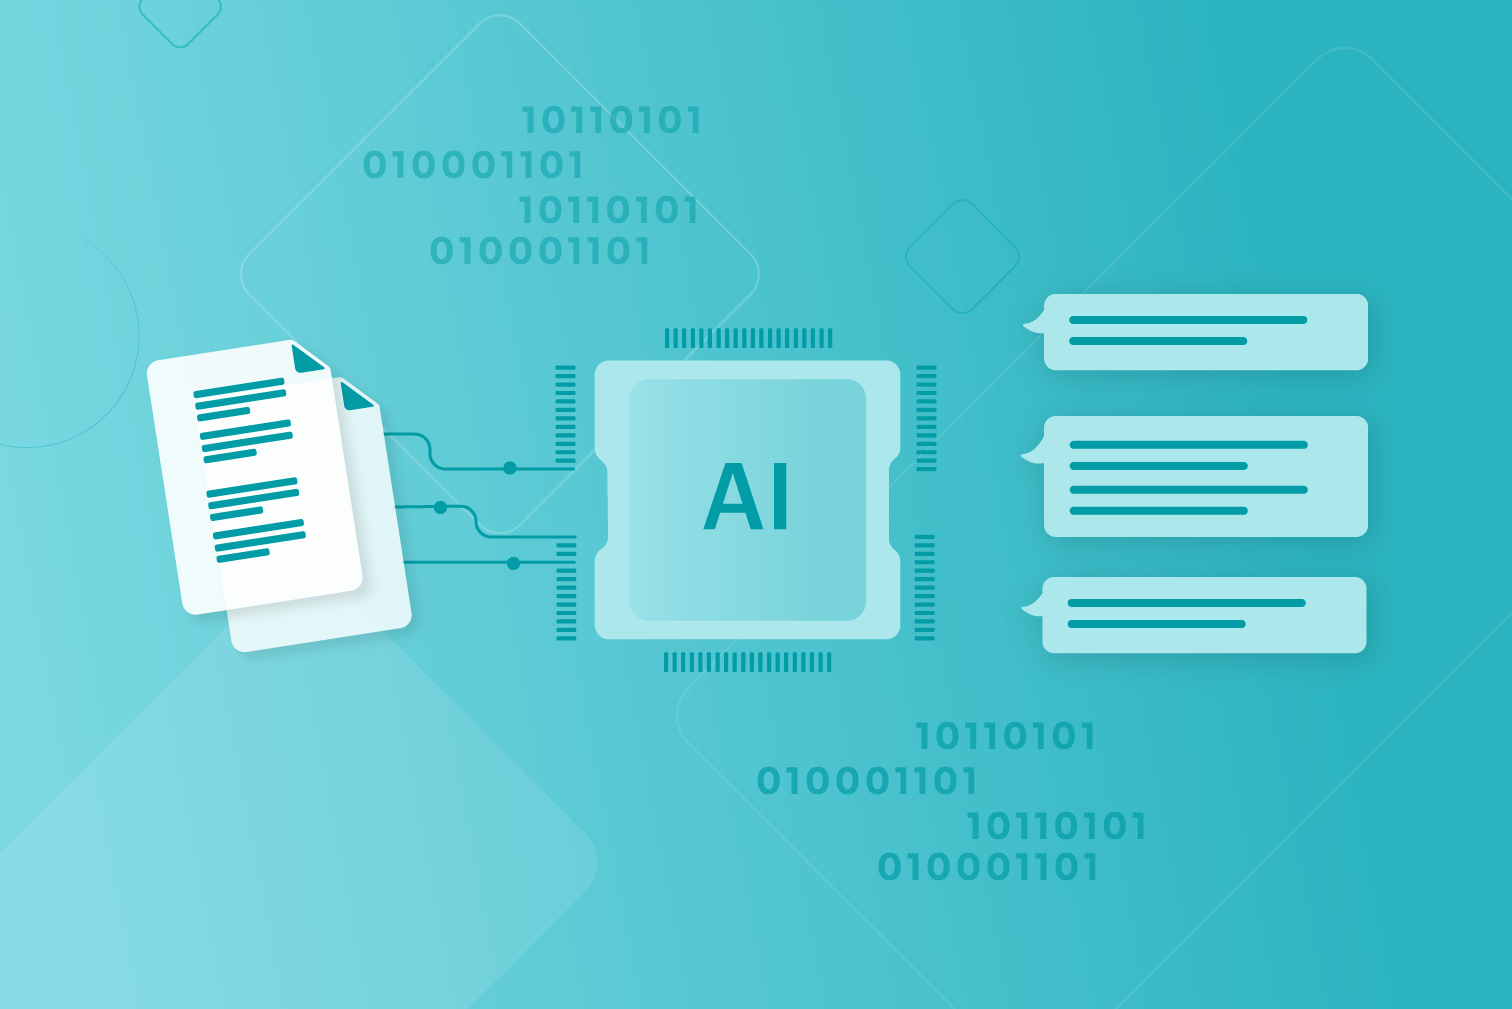 How to summarize and extract text from PDF with AI 